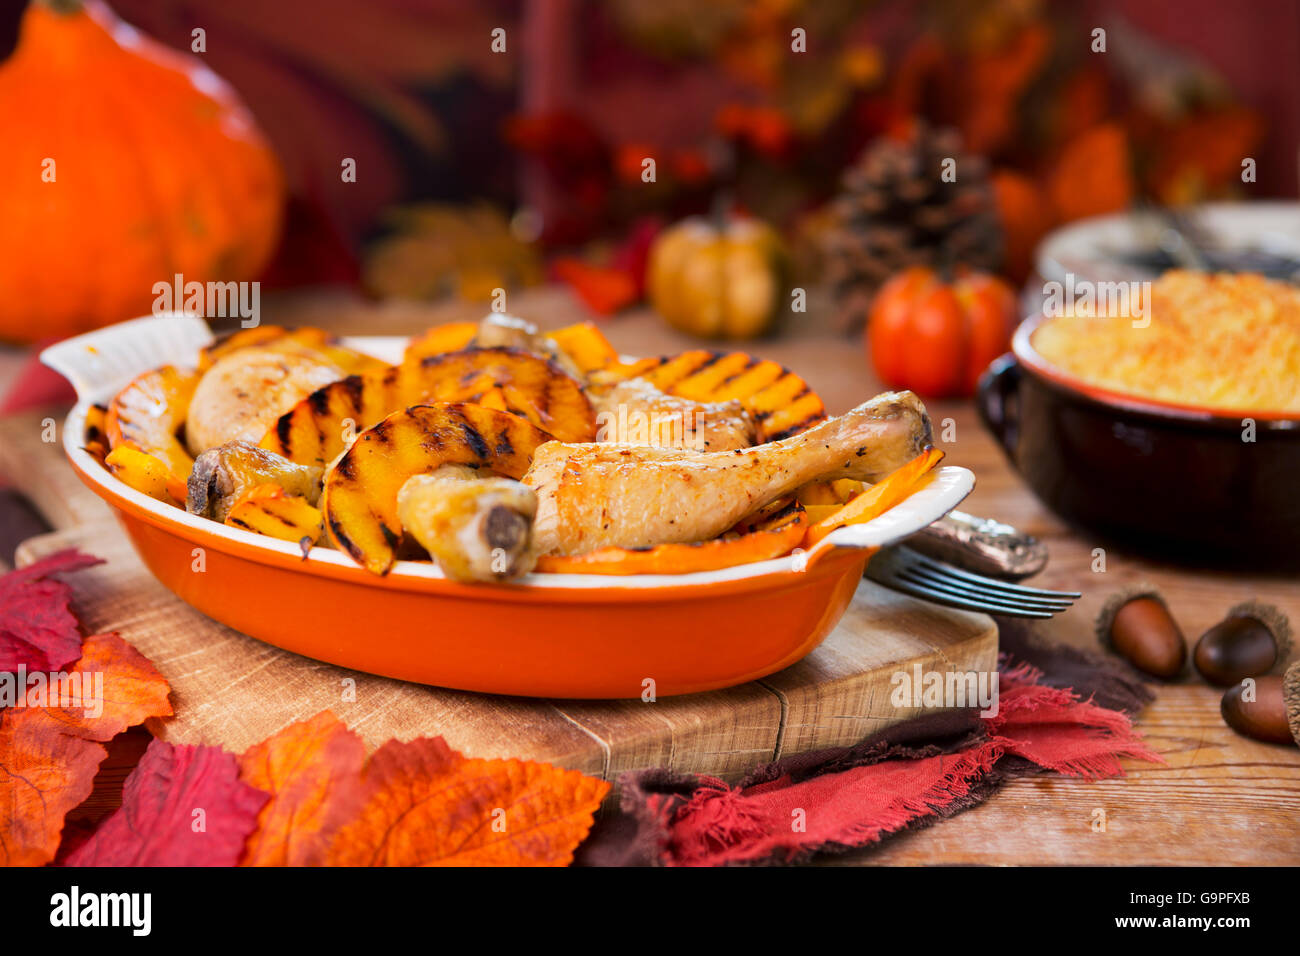 A casserole with oven roasted chicken and grilled pumpkin on a rustic table with autumn decorations. Stock Photo